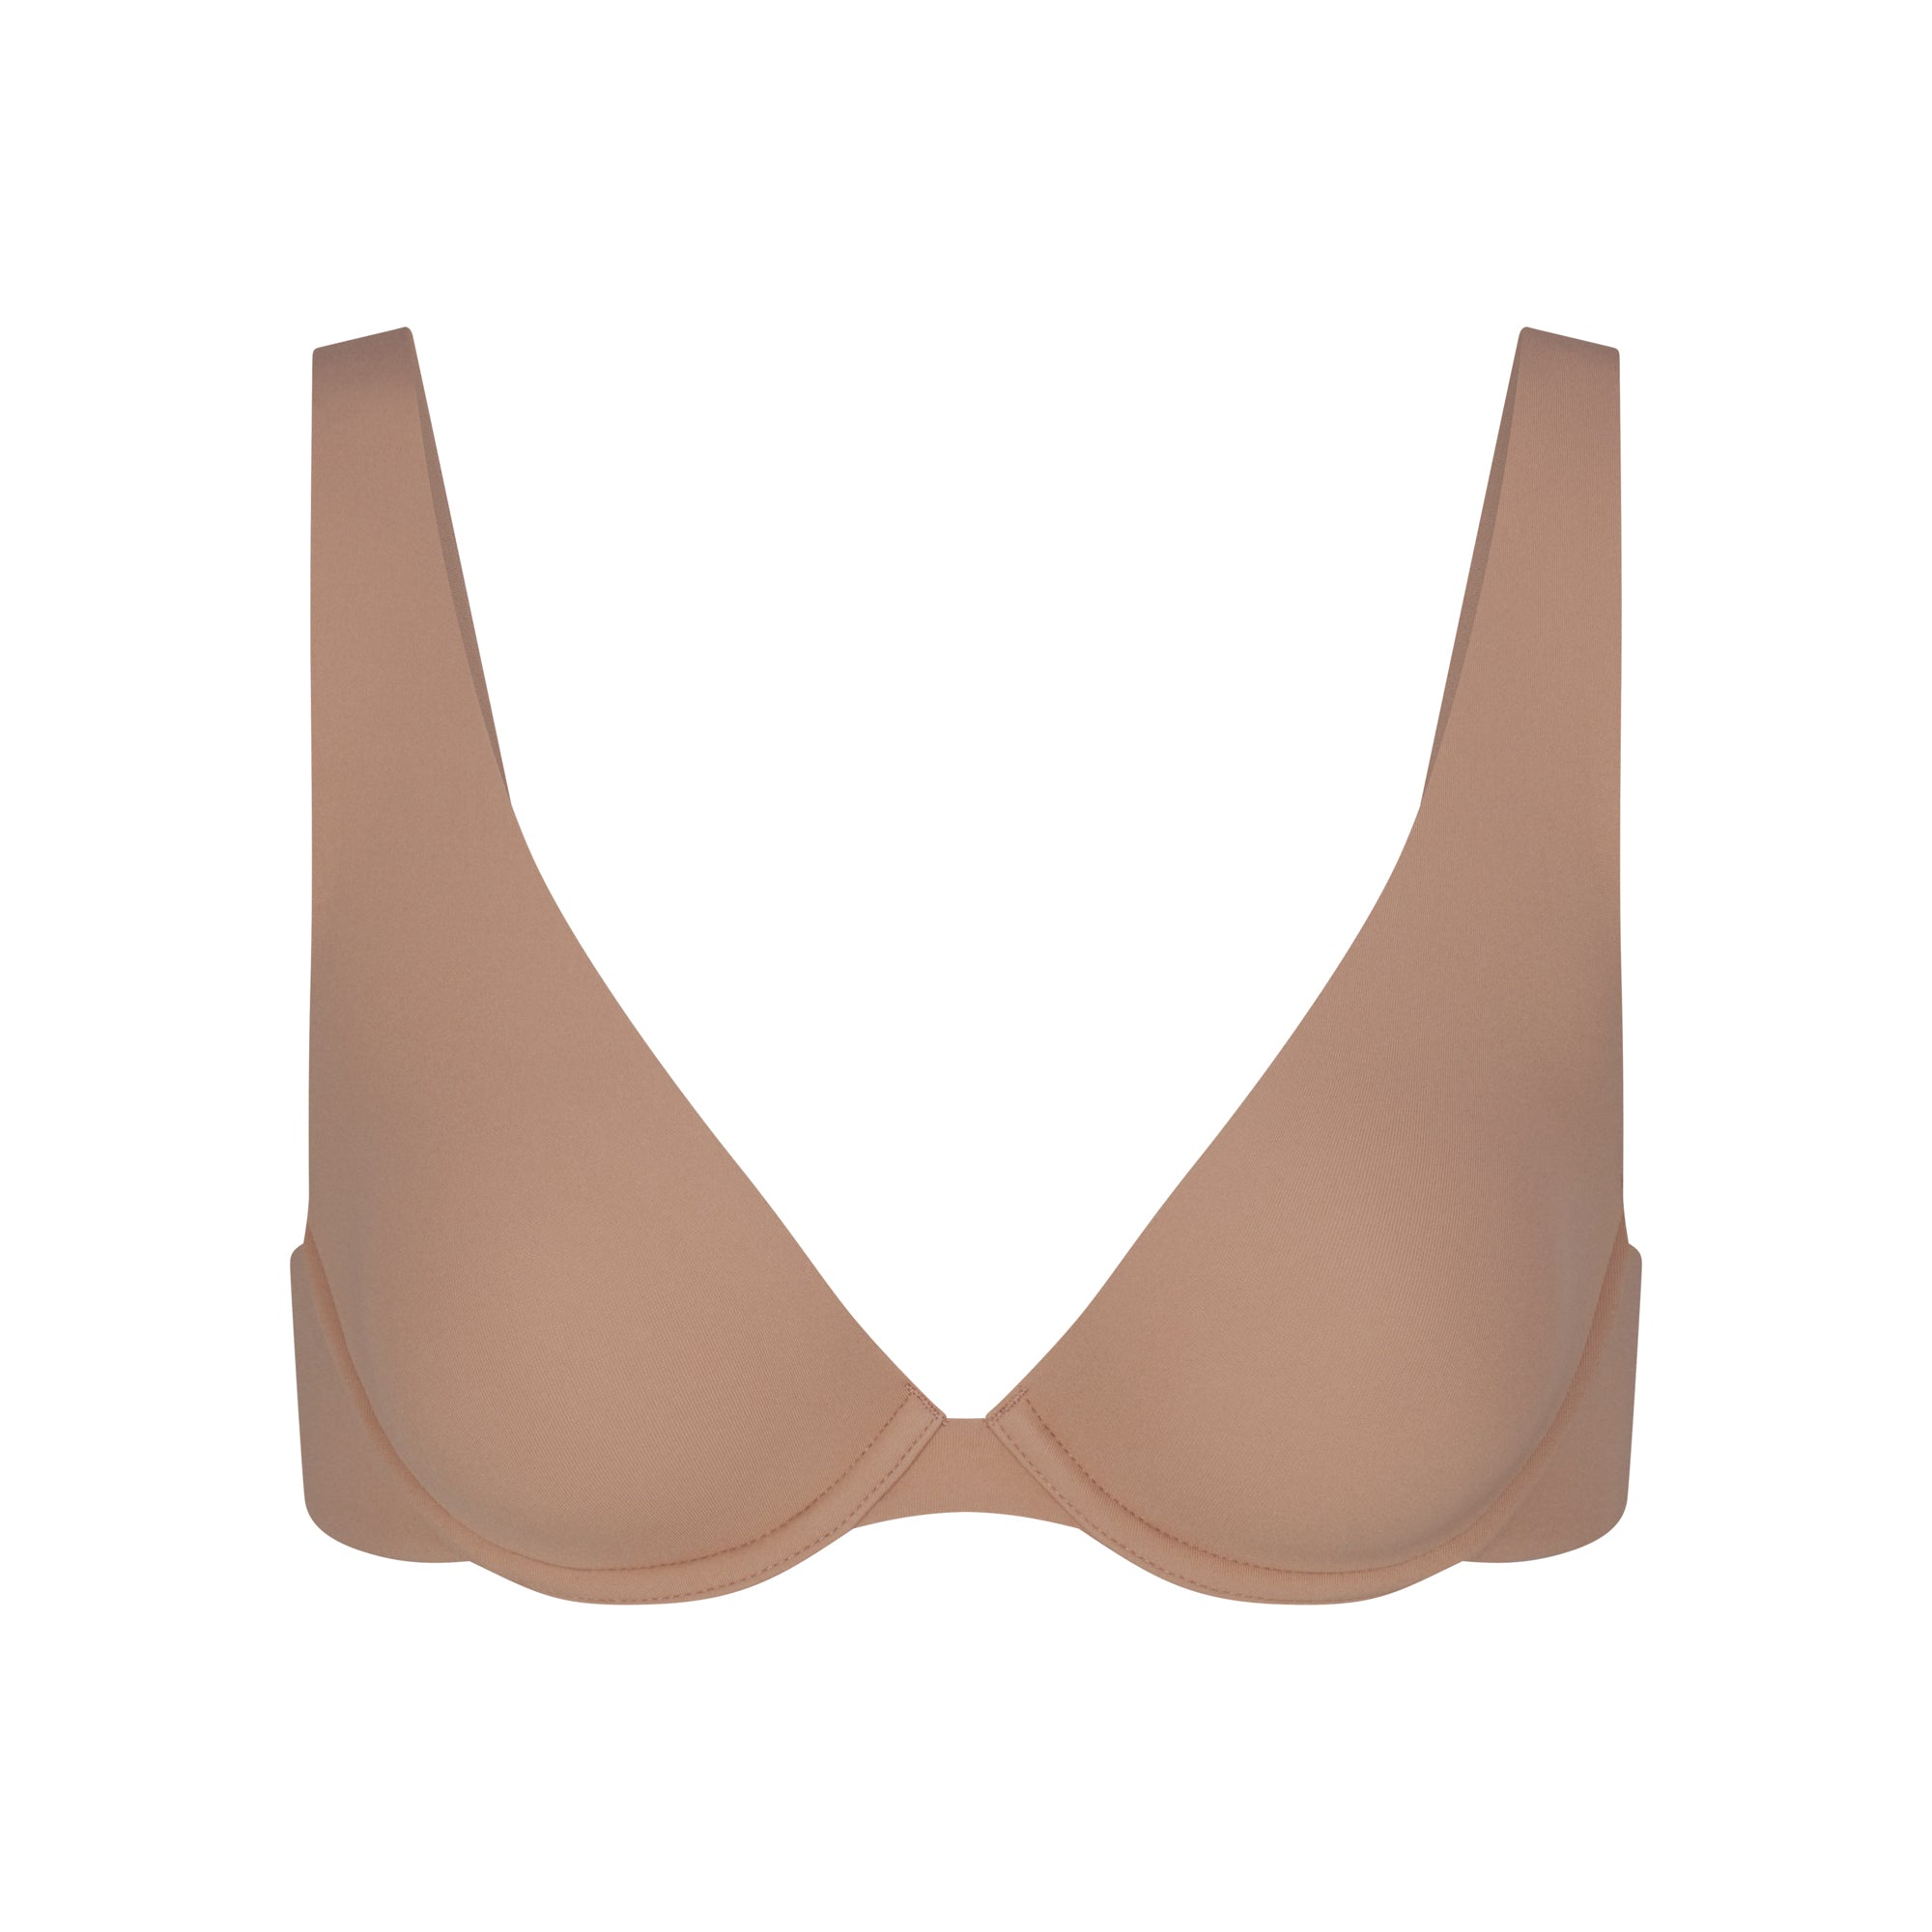 FITS EVERYBODY UNLINED APEX PLUNGE BRA